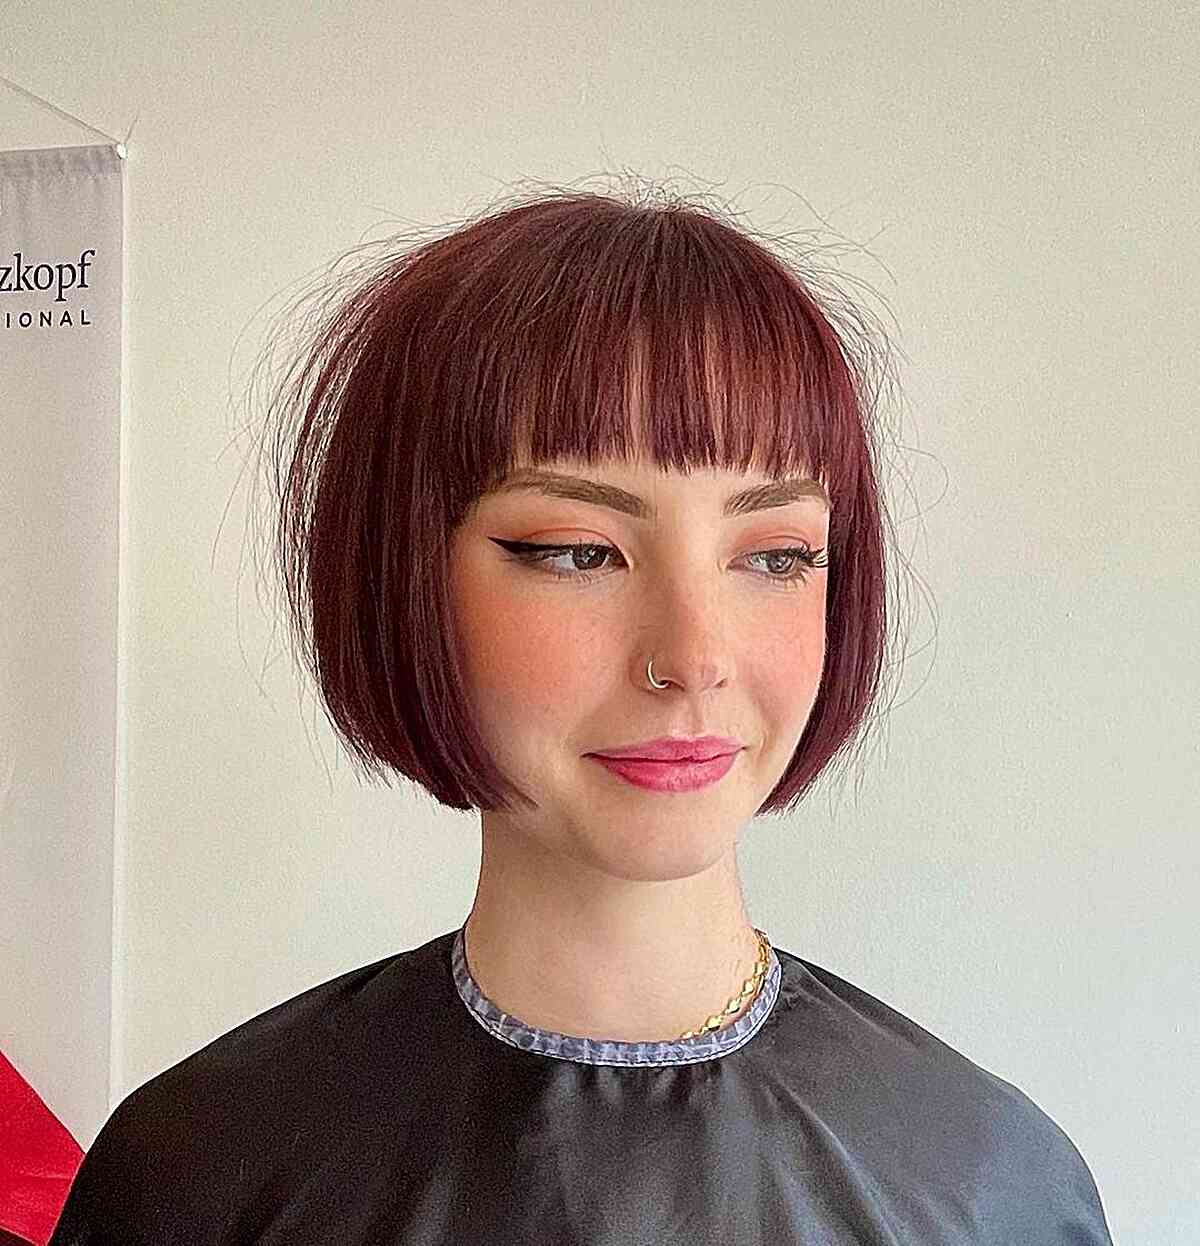 Chin-Length Blunt and Edgy Vibrant Bob Cut with Bangs 